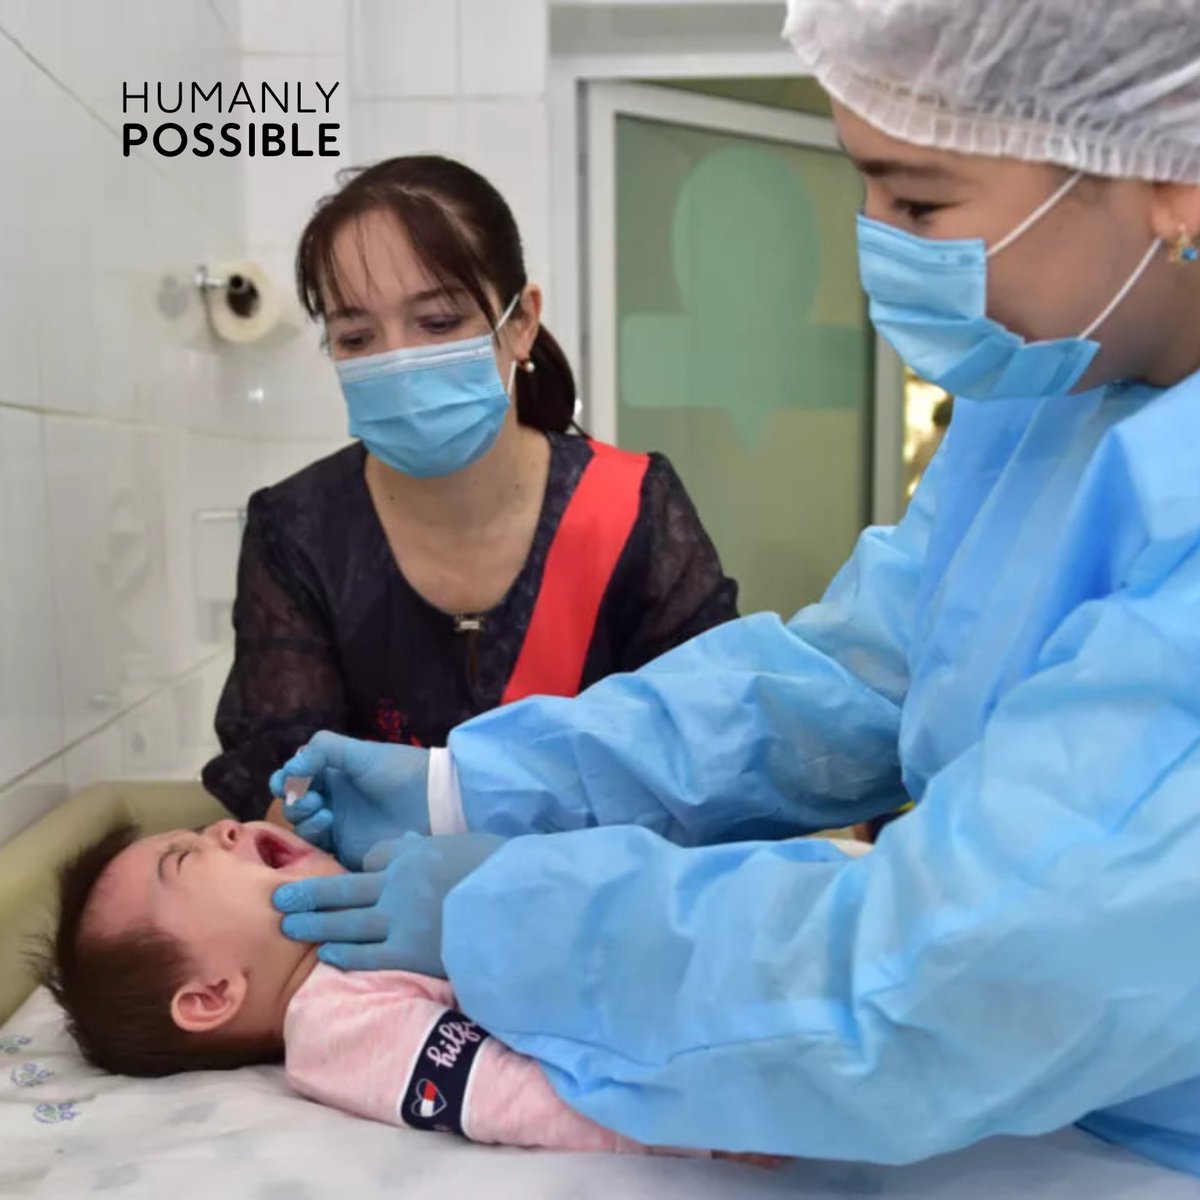 Uzbekistan 🇺🇿 was one of the few countries that ran uninteruppted routine immunisation during #COVID19 pandemic and continued delivering vaccines to children. Parents should religiously follow the vaccination #schedule, which reduces the risk of serious diseases like polio,